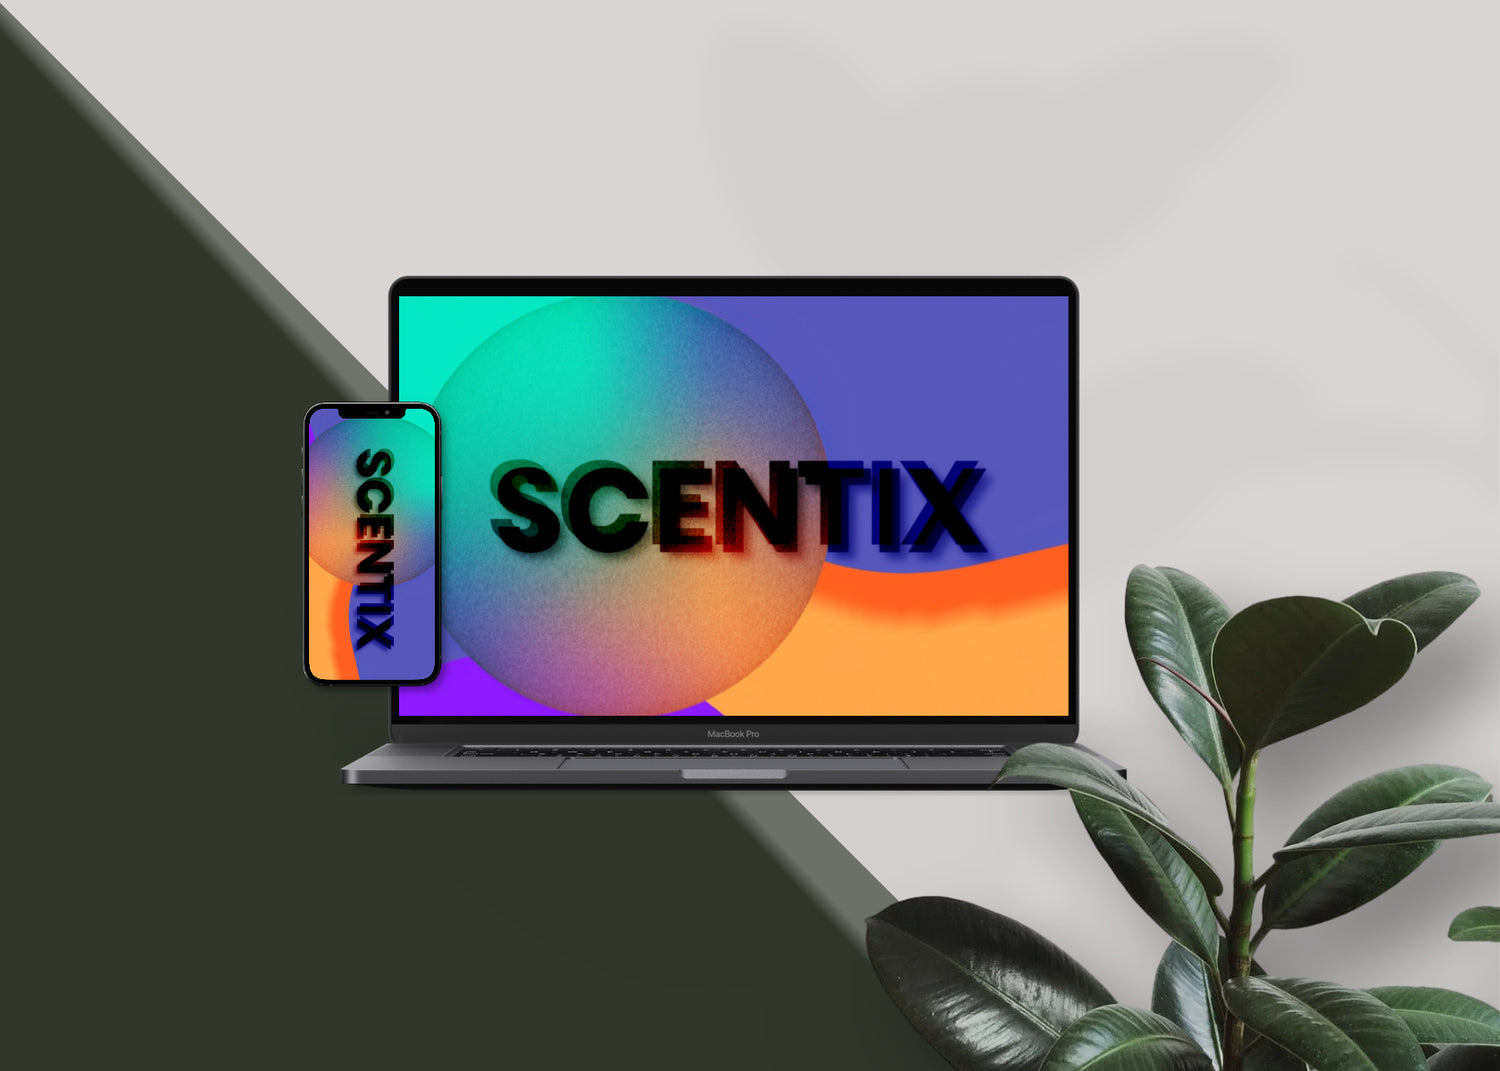 A image with the text SCENTIX displayed on a laptop and a phone